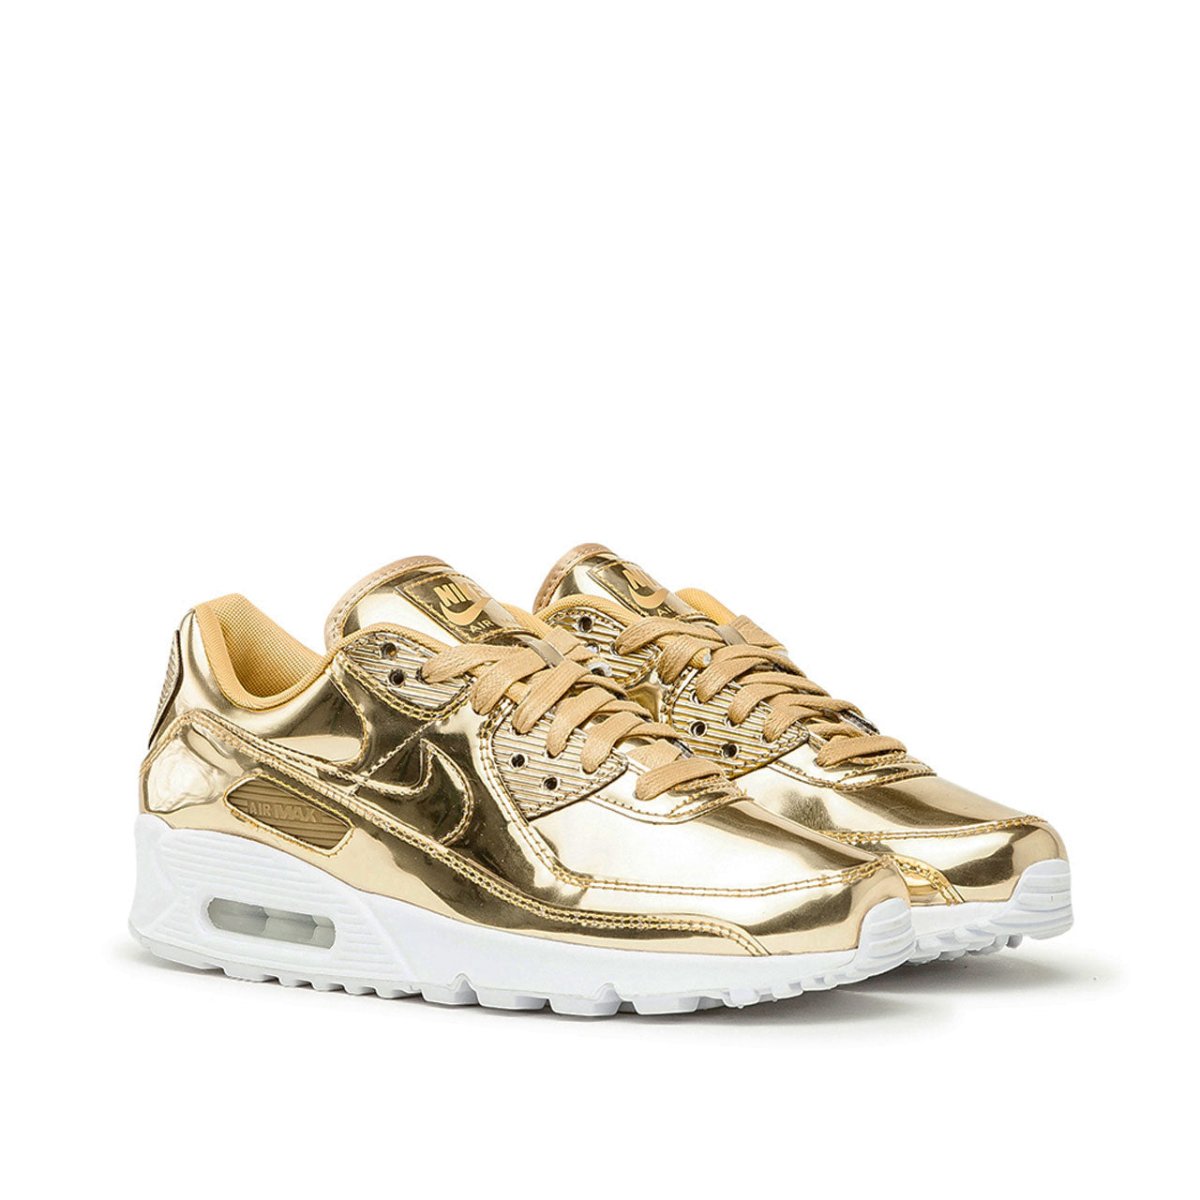 Nike WMNS Air Max 90 SP (Gold)  - Allike Store